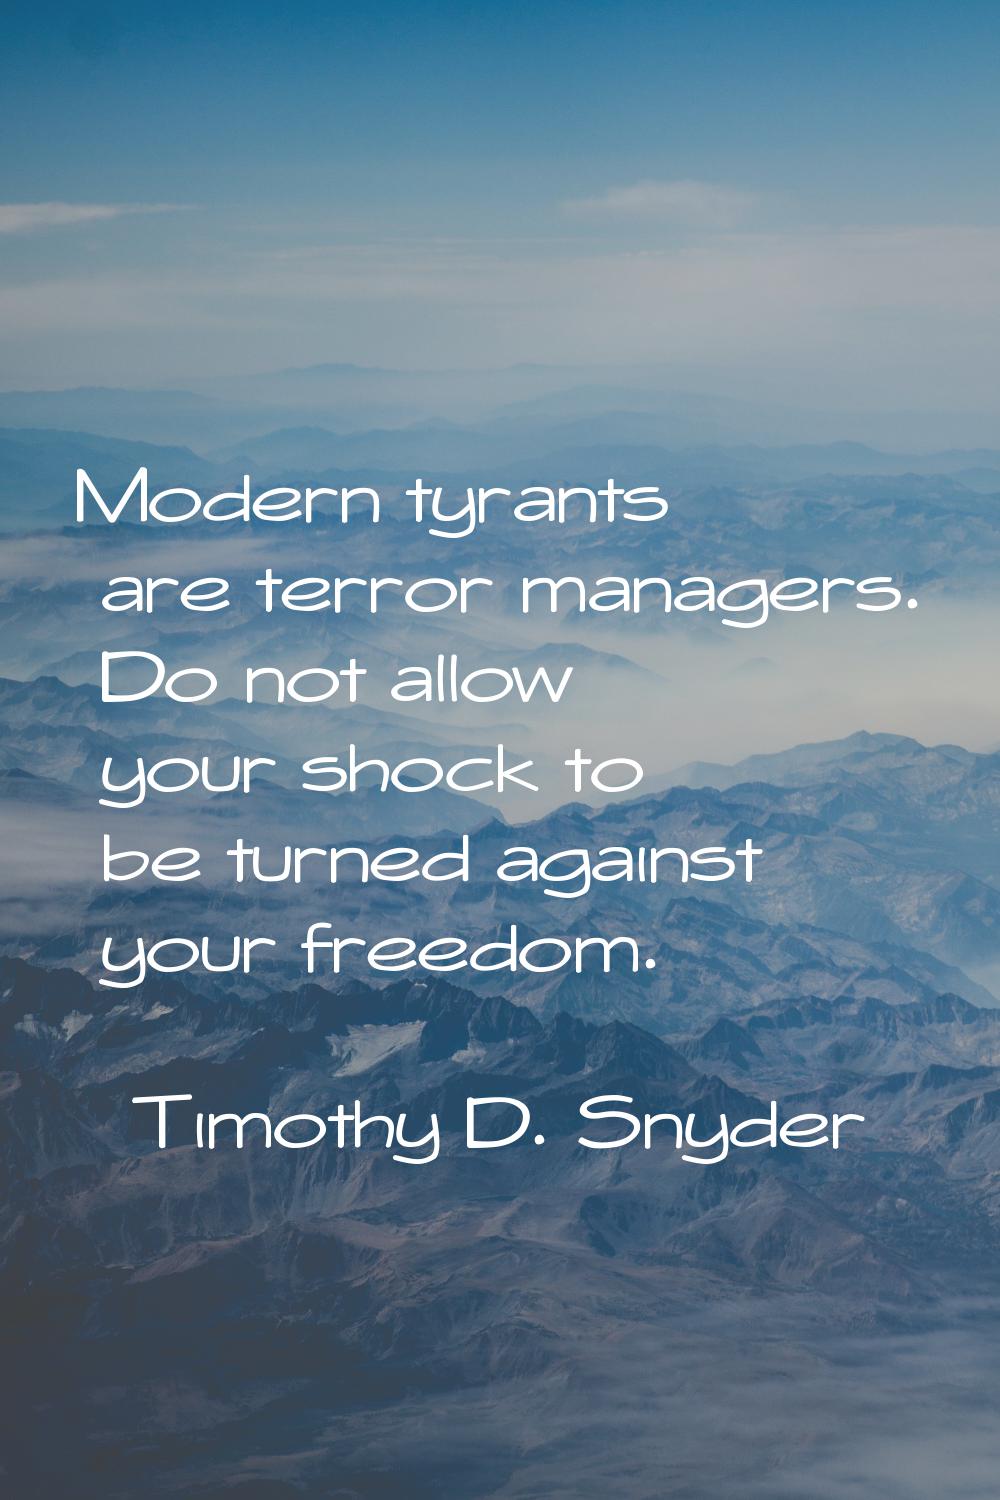 Modern tyrants are terror managers. Do not allow your shock to be turned against your freedom.